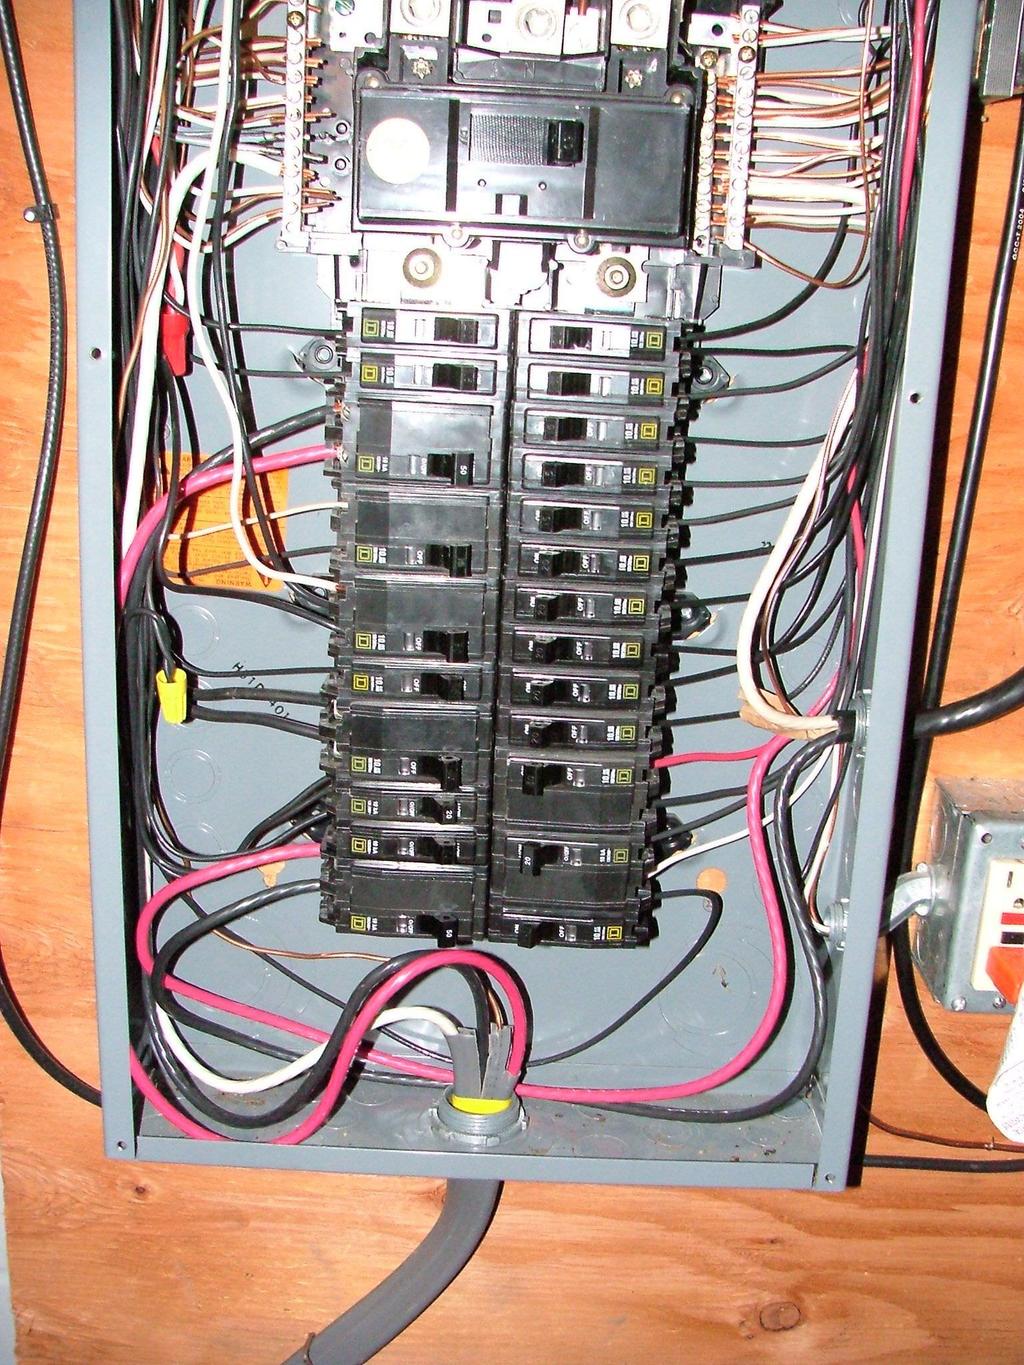 A circuit breaker is a switch that automatically opens a circuit if too much current flows through it.